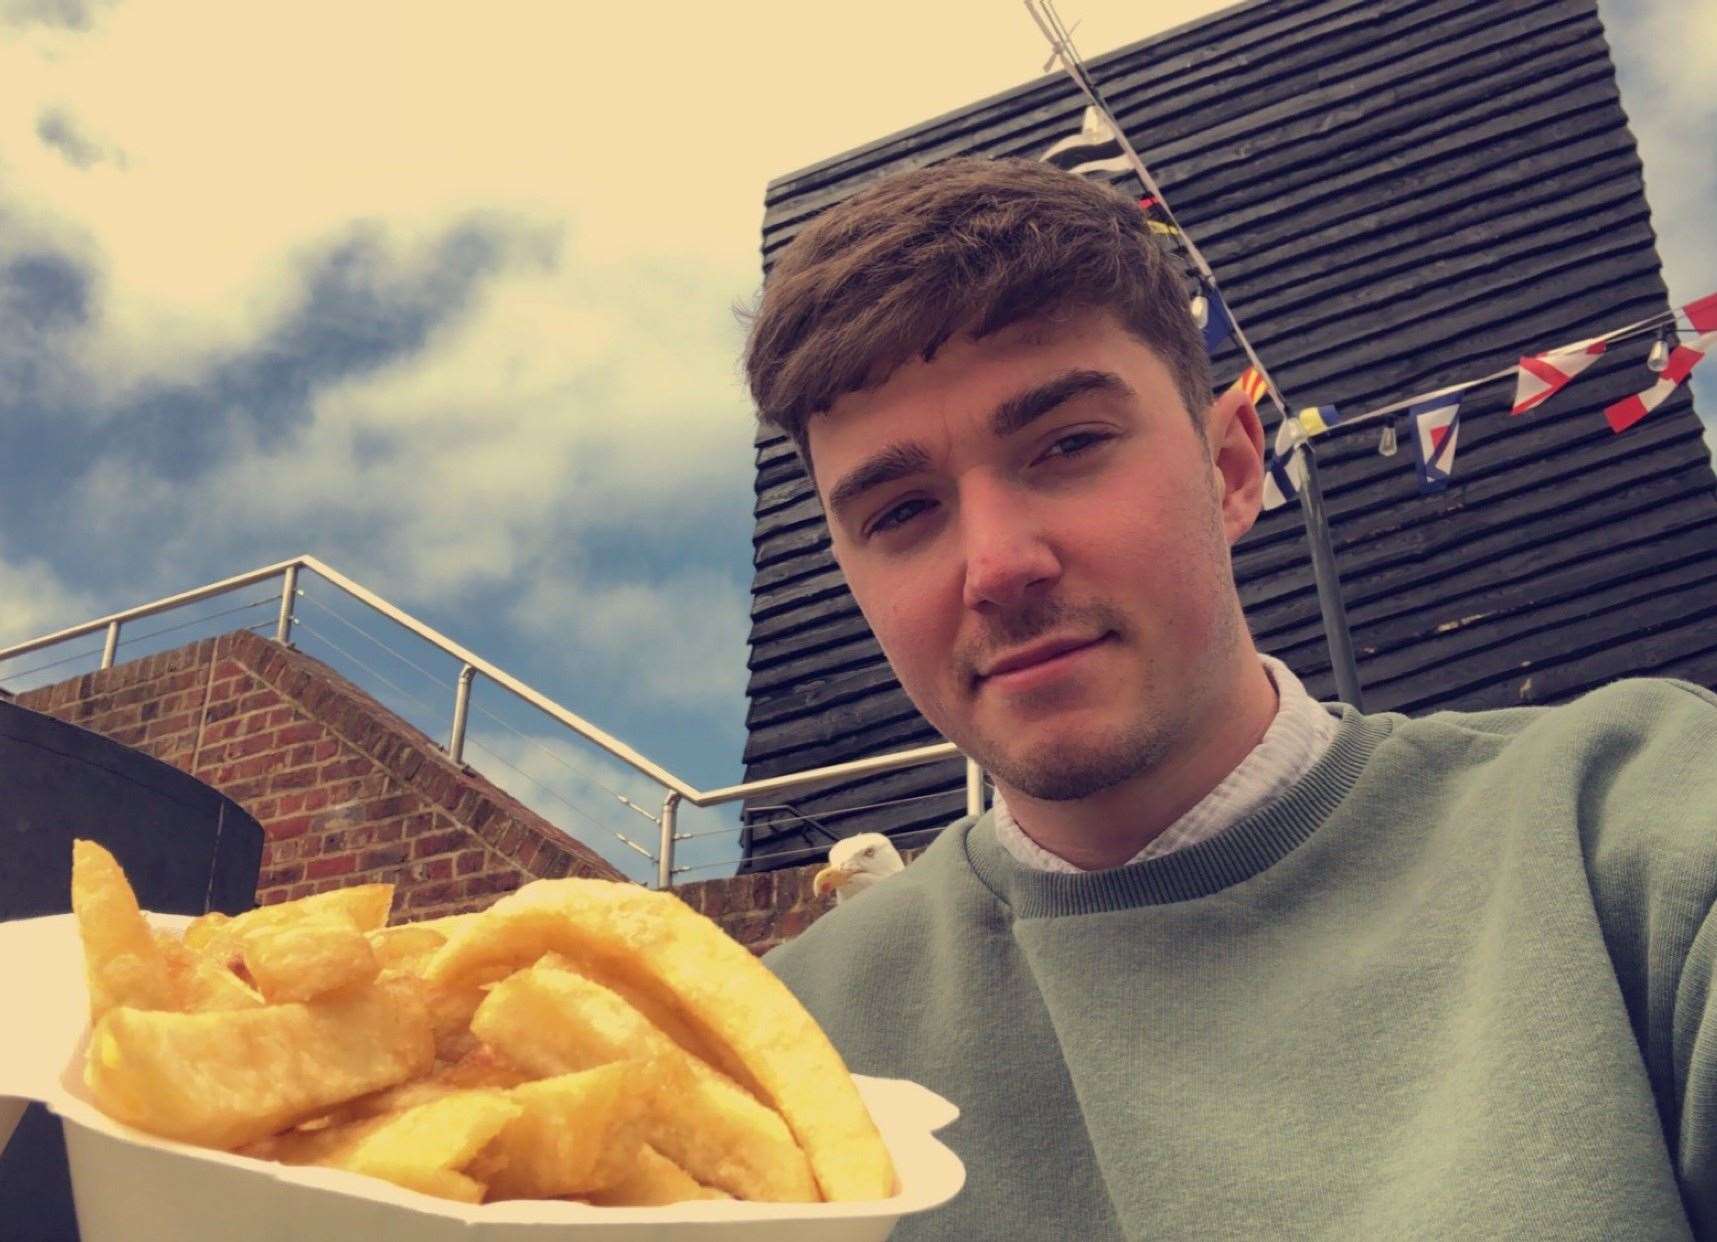 KentOnline reporter Oliver Leonard described Sandy's in Folkestone Harbour as "the perfect lunchtime treat".